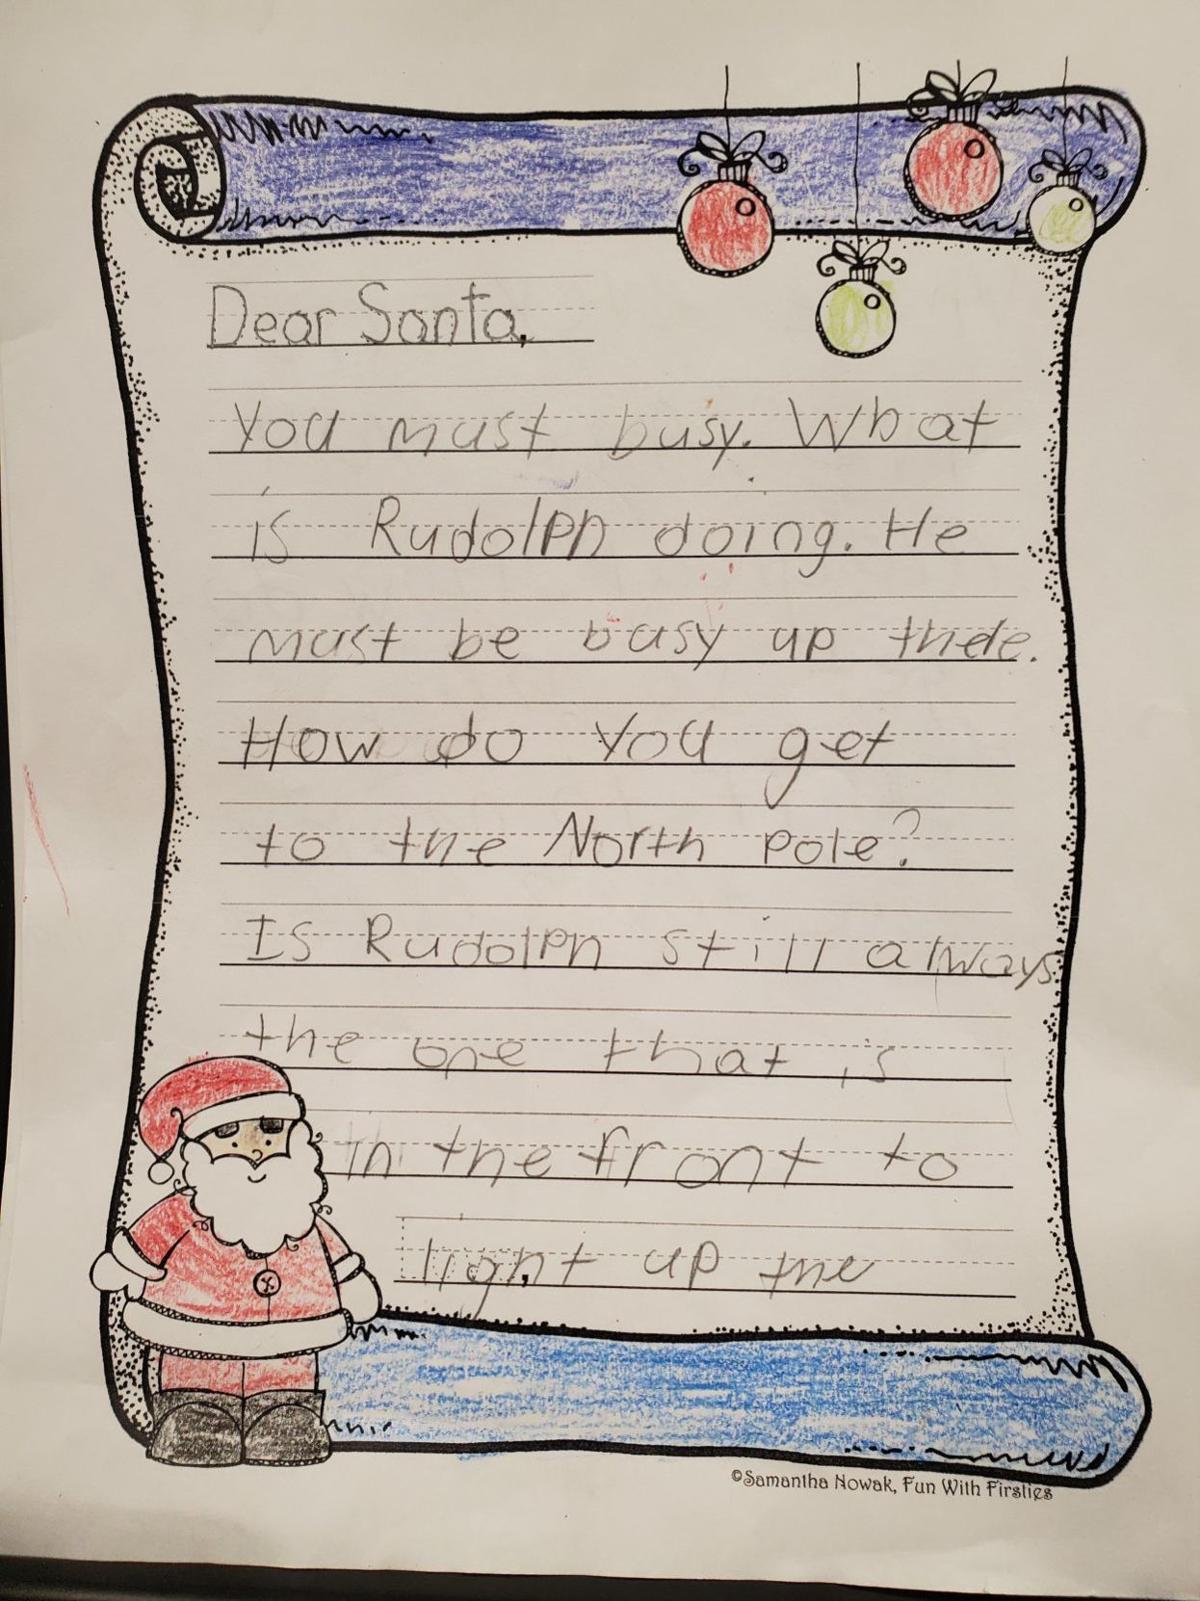 Culpeper Second Graders Send Their Christmas Wishes To The North Pole Latest News Starexponent Com - blox for fun gust official roblox